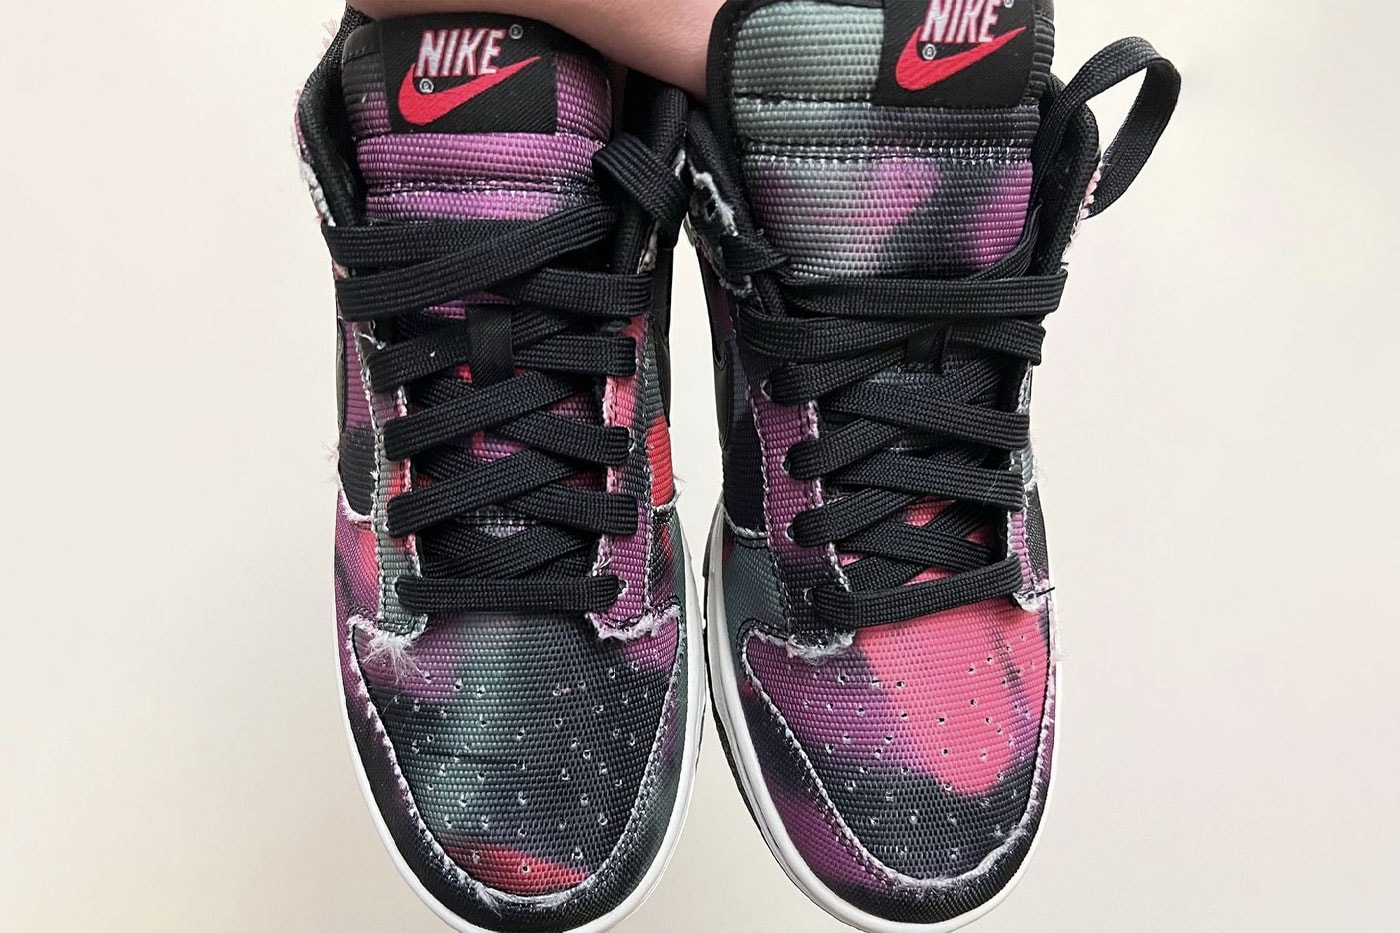 Nike Dunk Low Graffiti swoosh red pink purple black white gray green frayed edge graphics release info first look images